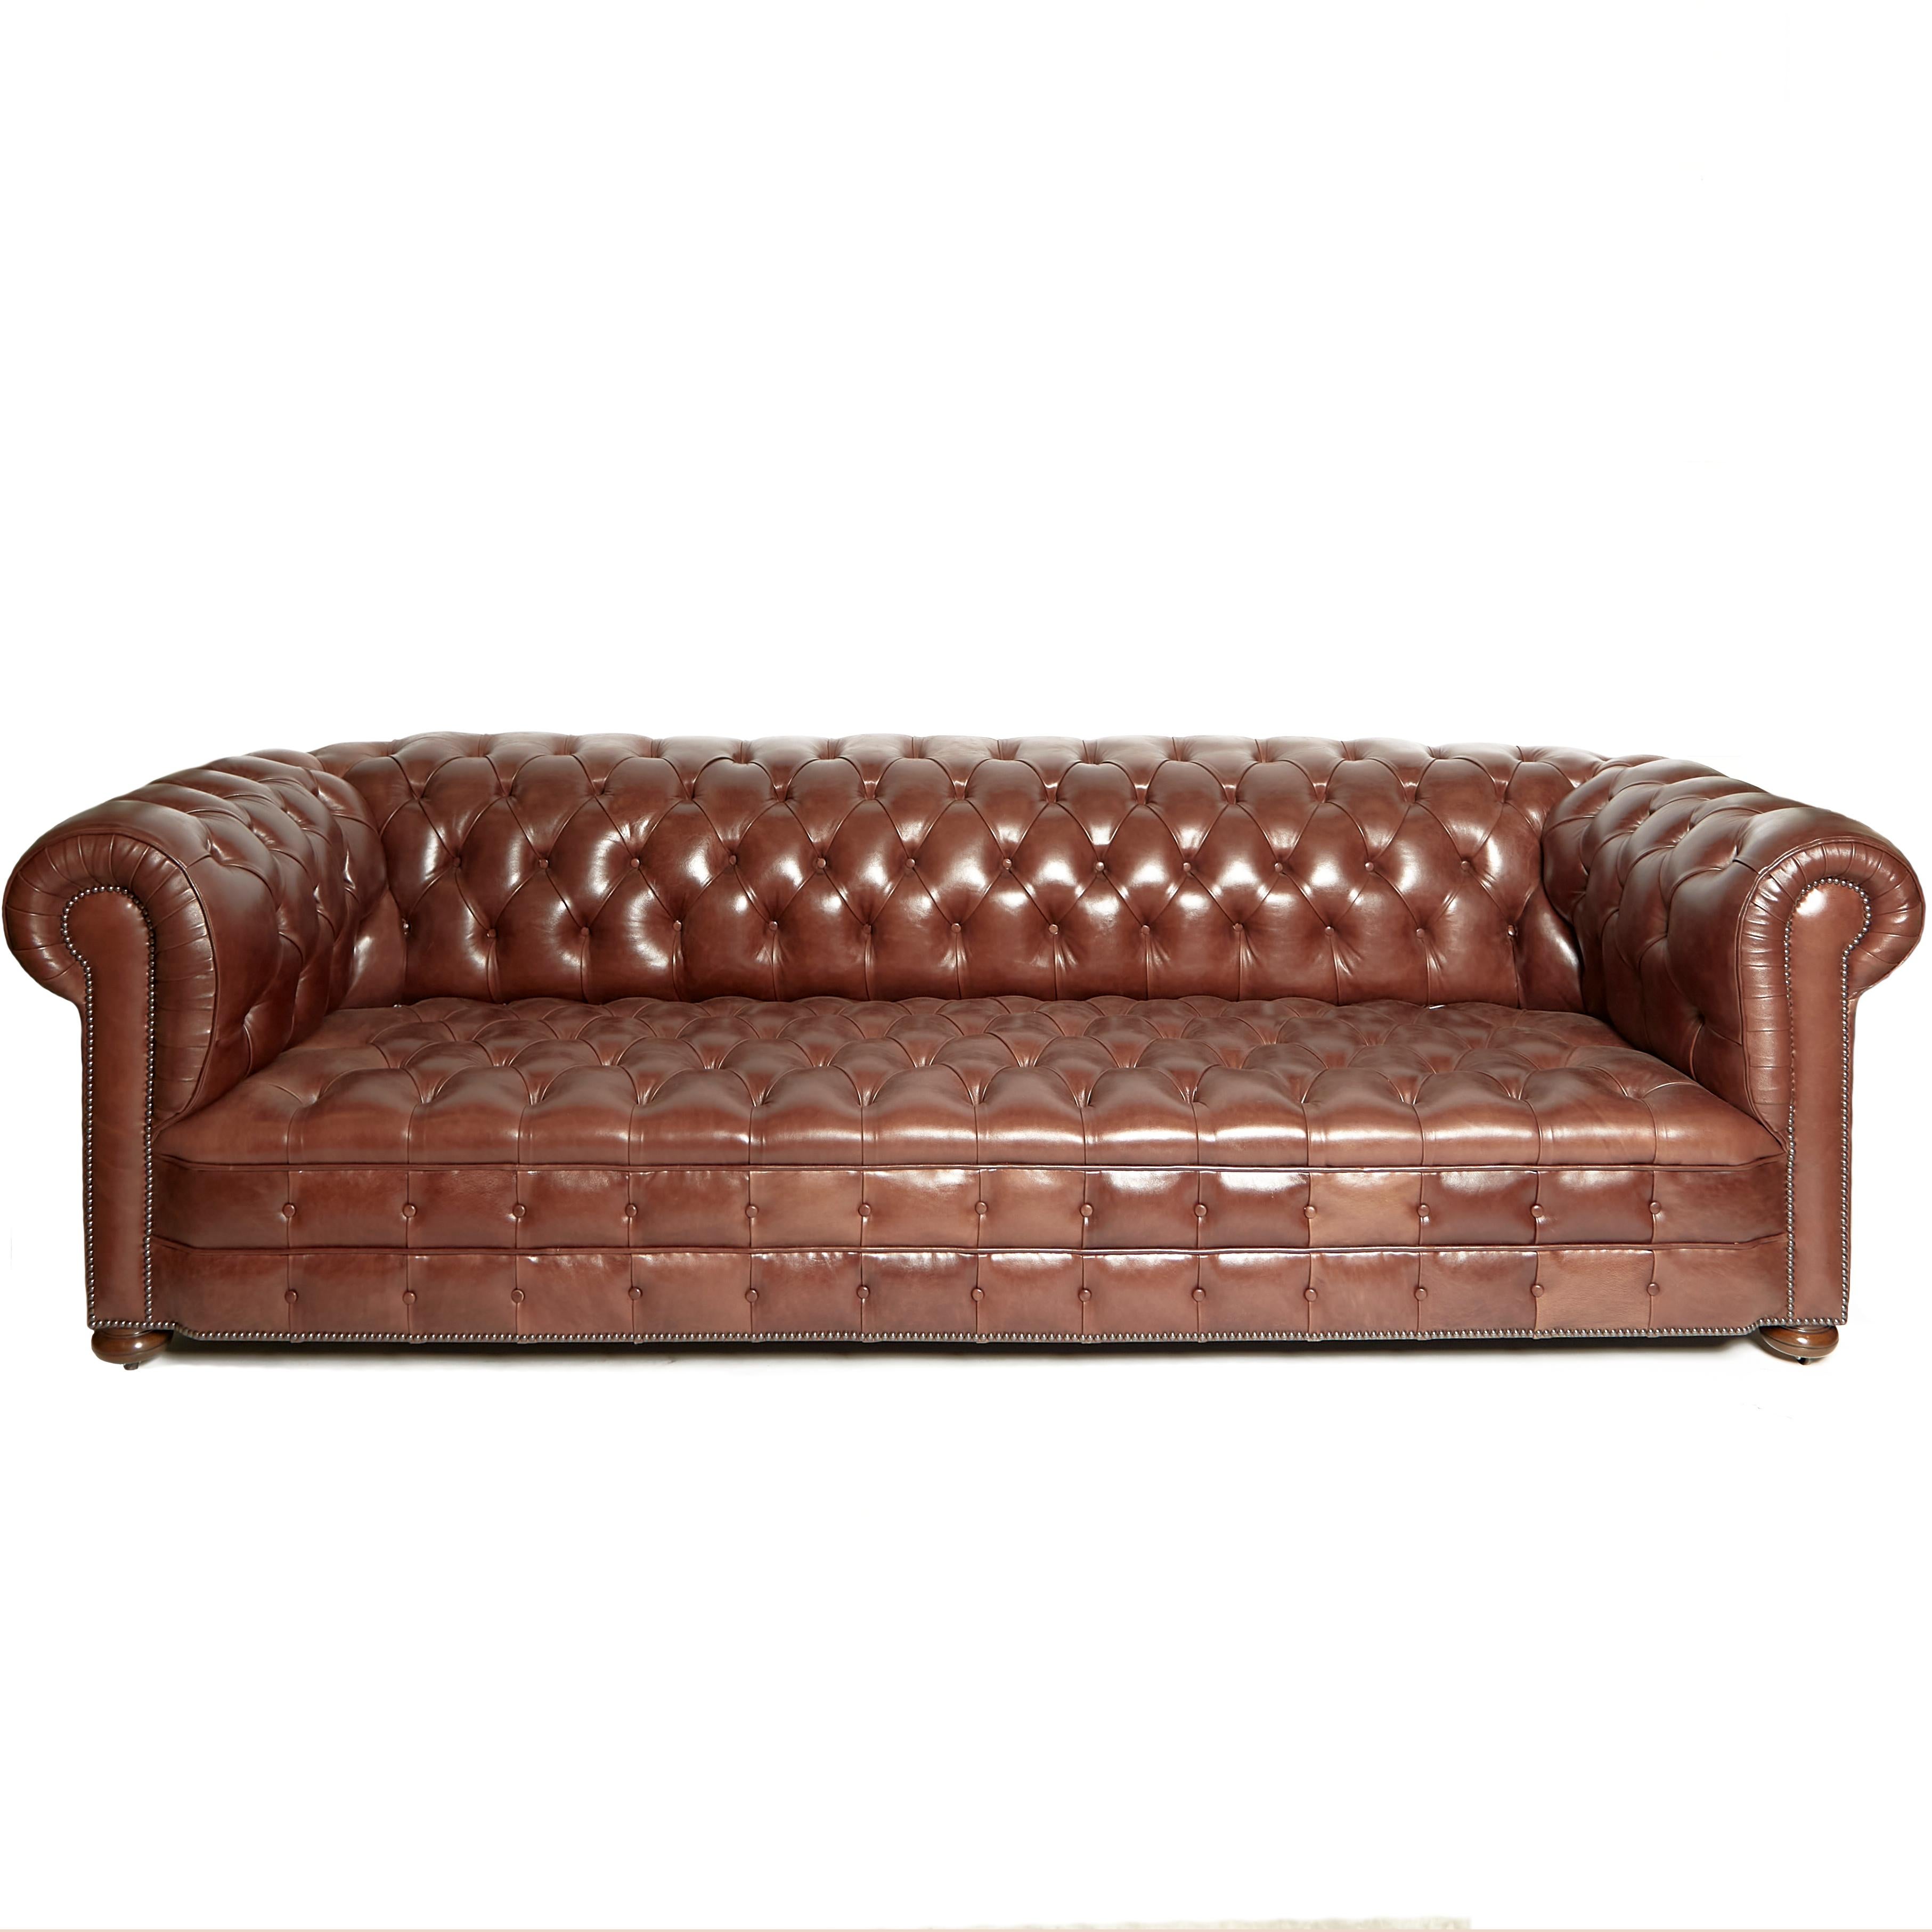 Pair of Traditionally Designed Large Chesterfield Leather Sofas 1